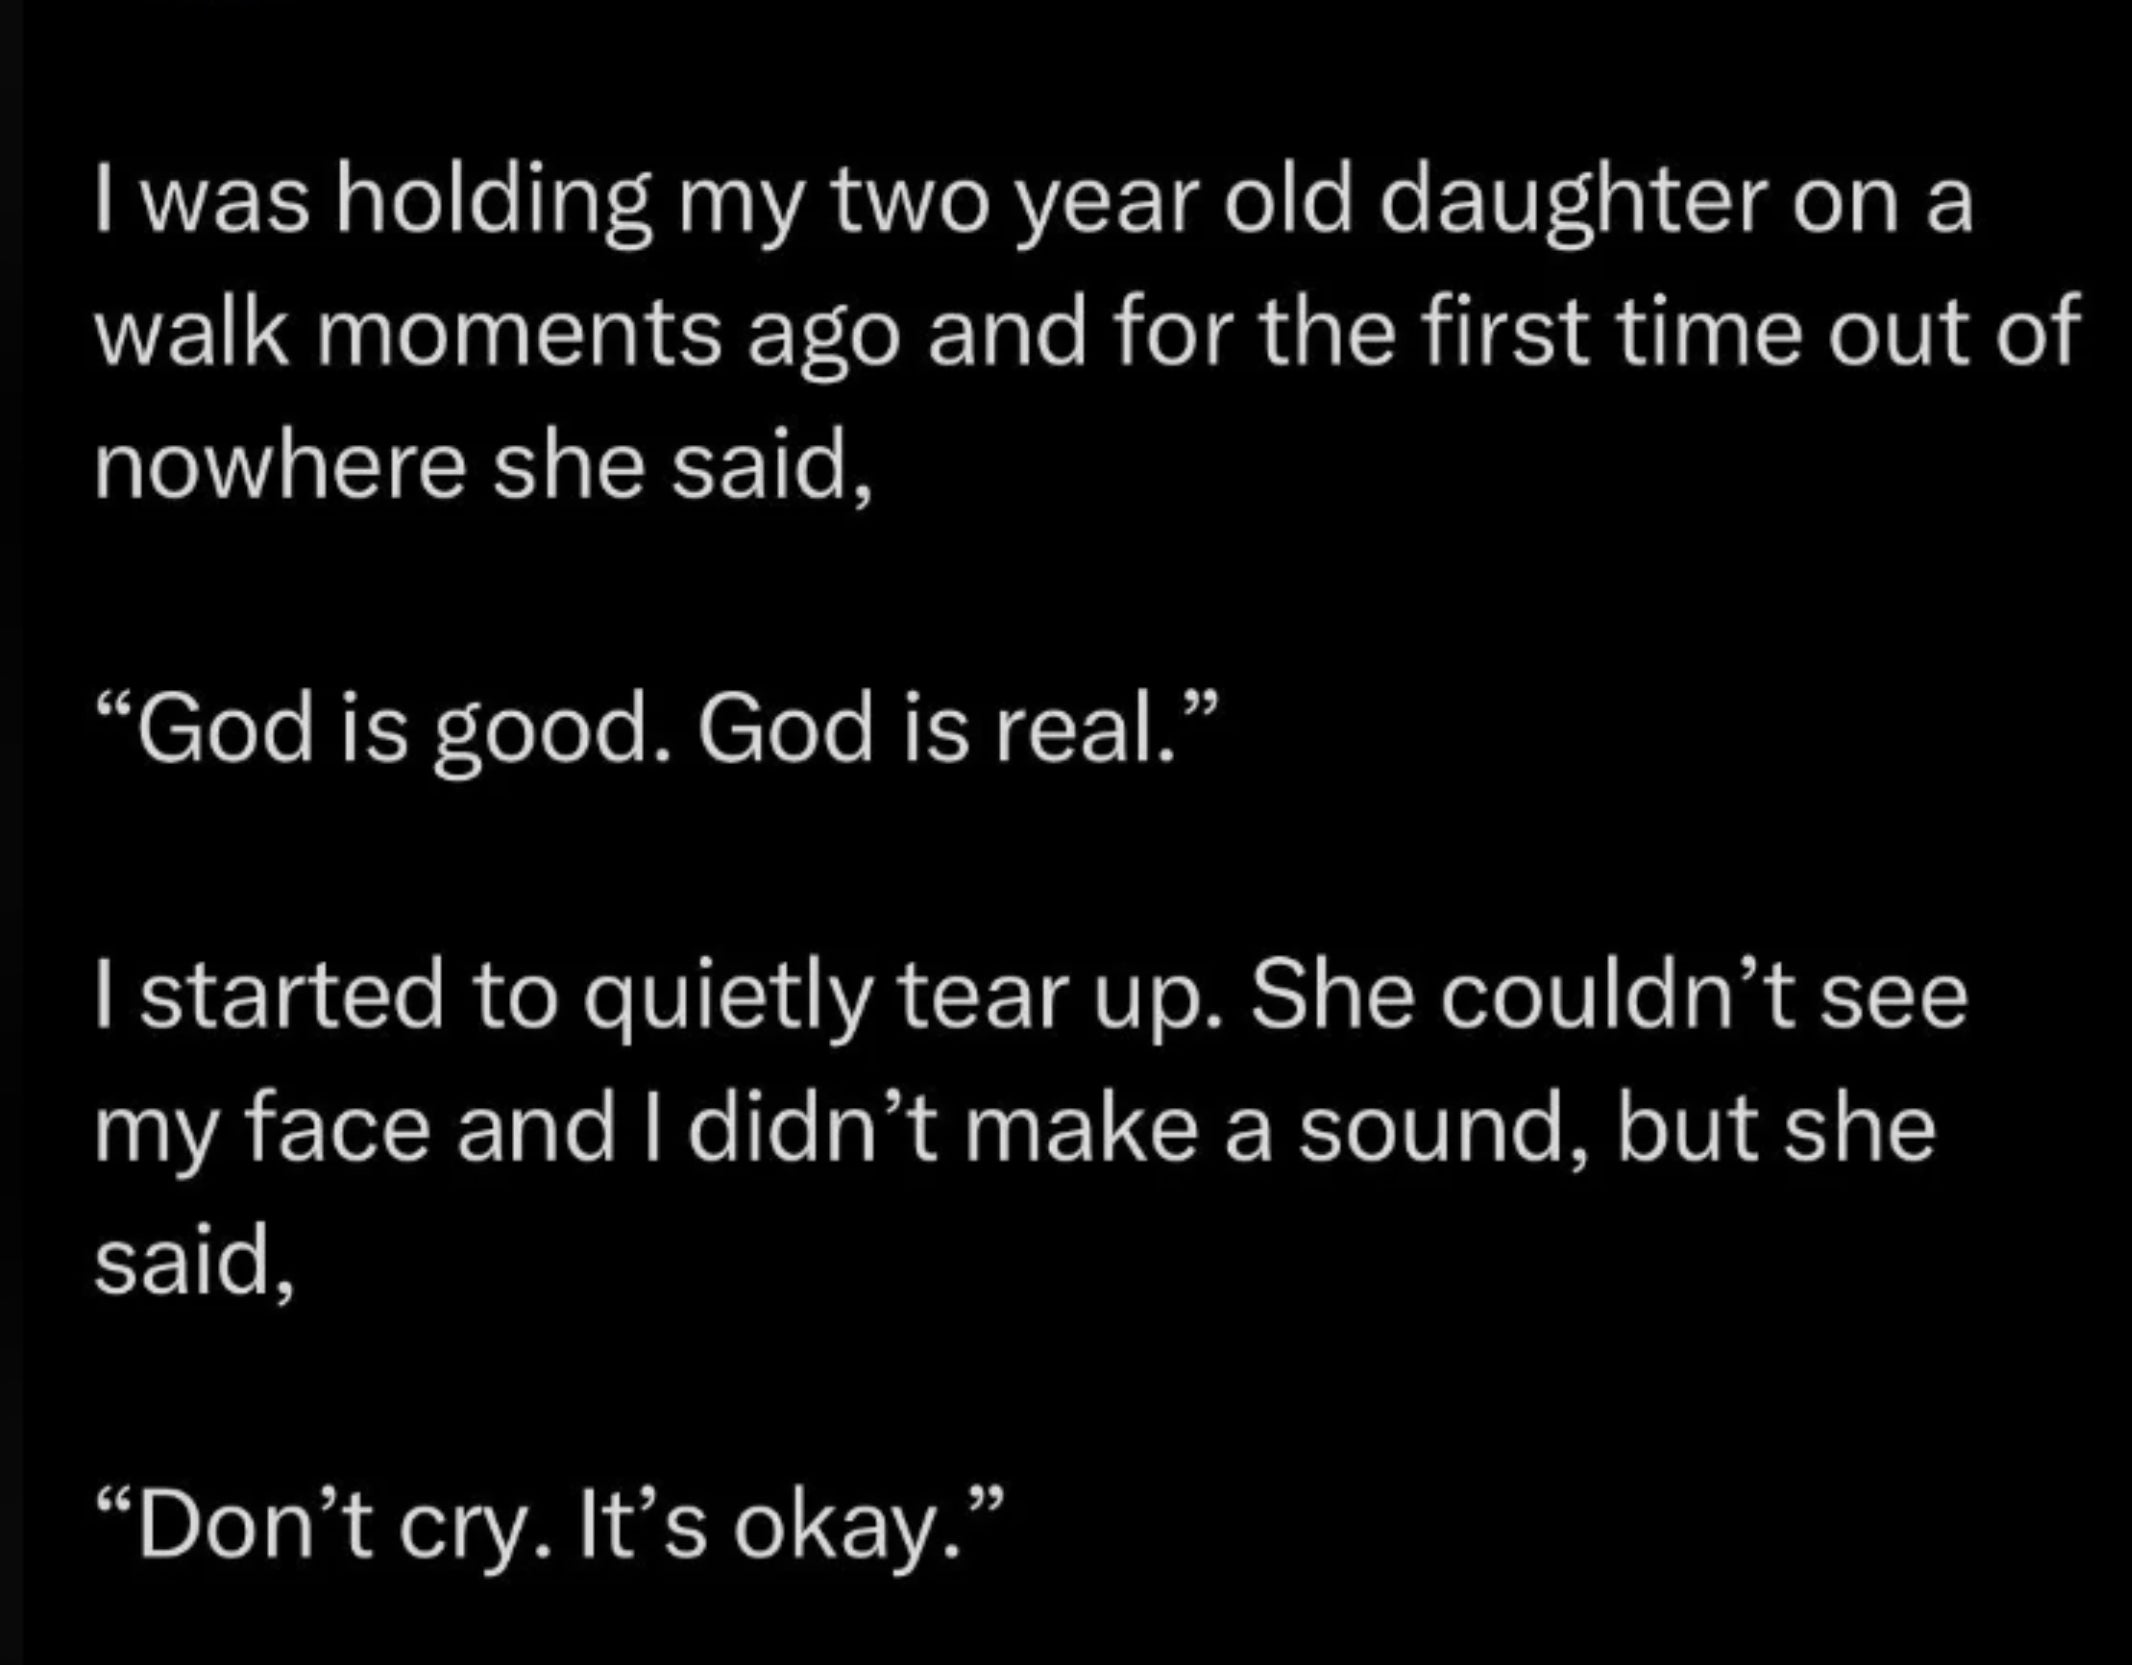 Guy walking with his 2-year-old daughter quietly tears up after she says &quot;God is good, God is real&quot; and then she says &quot;Don&#x27;t cry, it&#x27;s okay&quot;